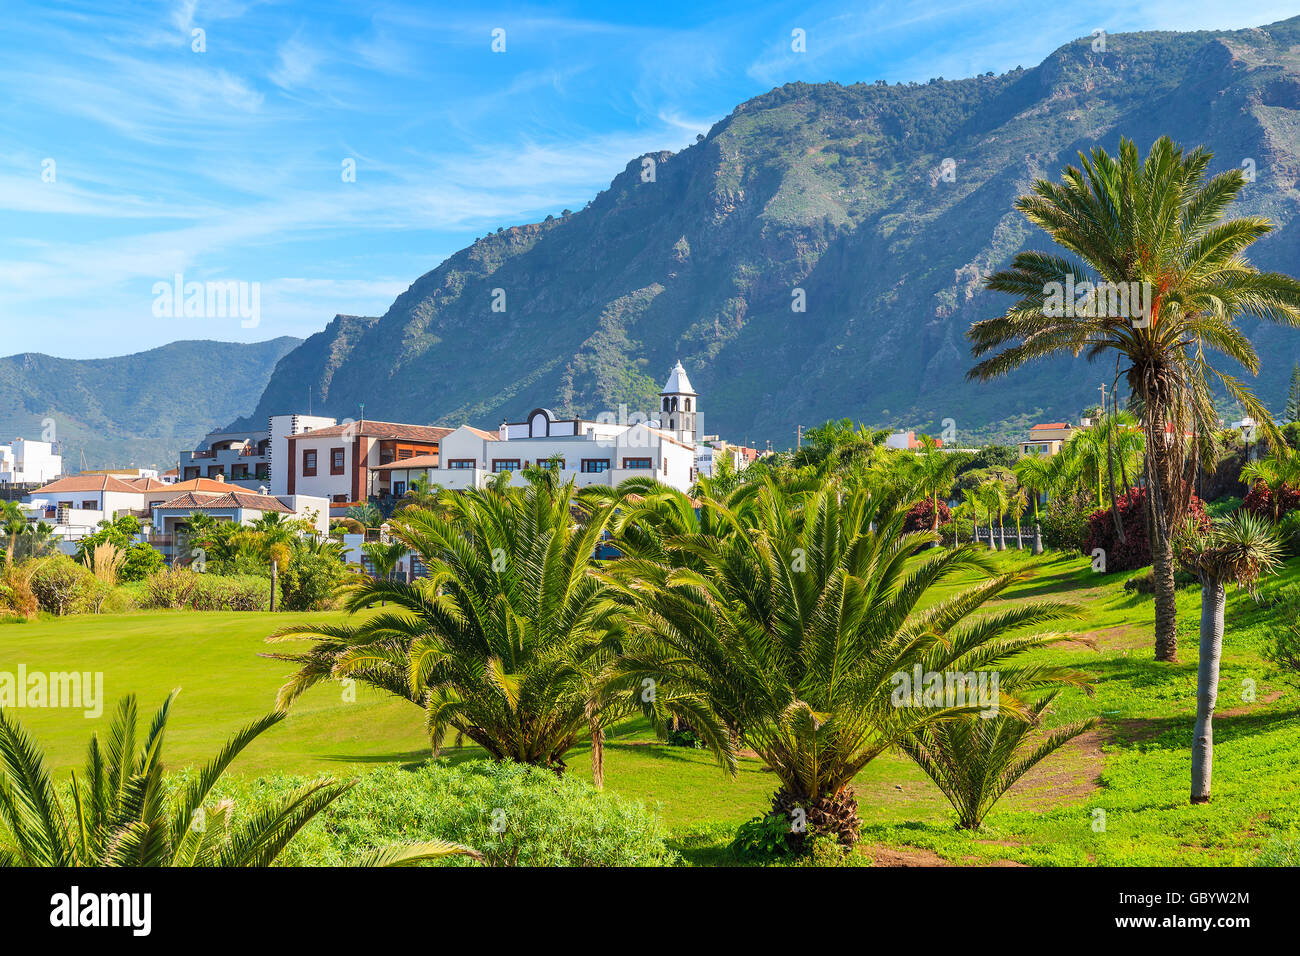 Tropical palm trees in mountain landscape of northern Tenerife with Buenavista del Norte town in distance, Canary Islands, Spain Stock Photo